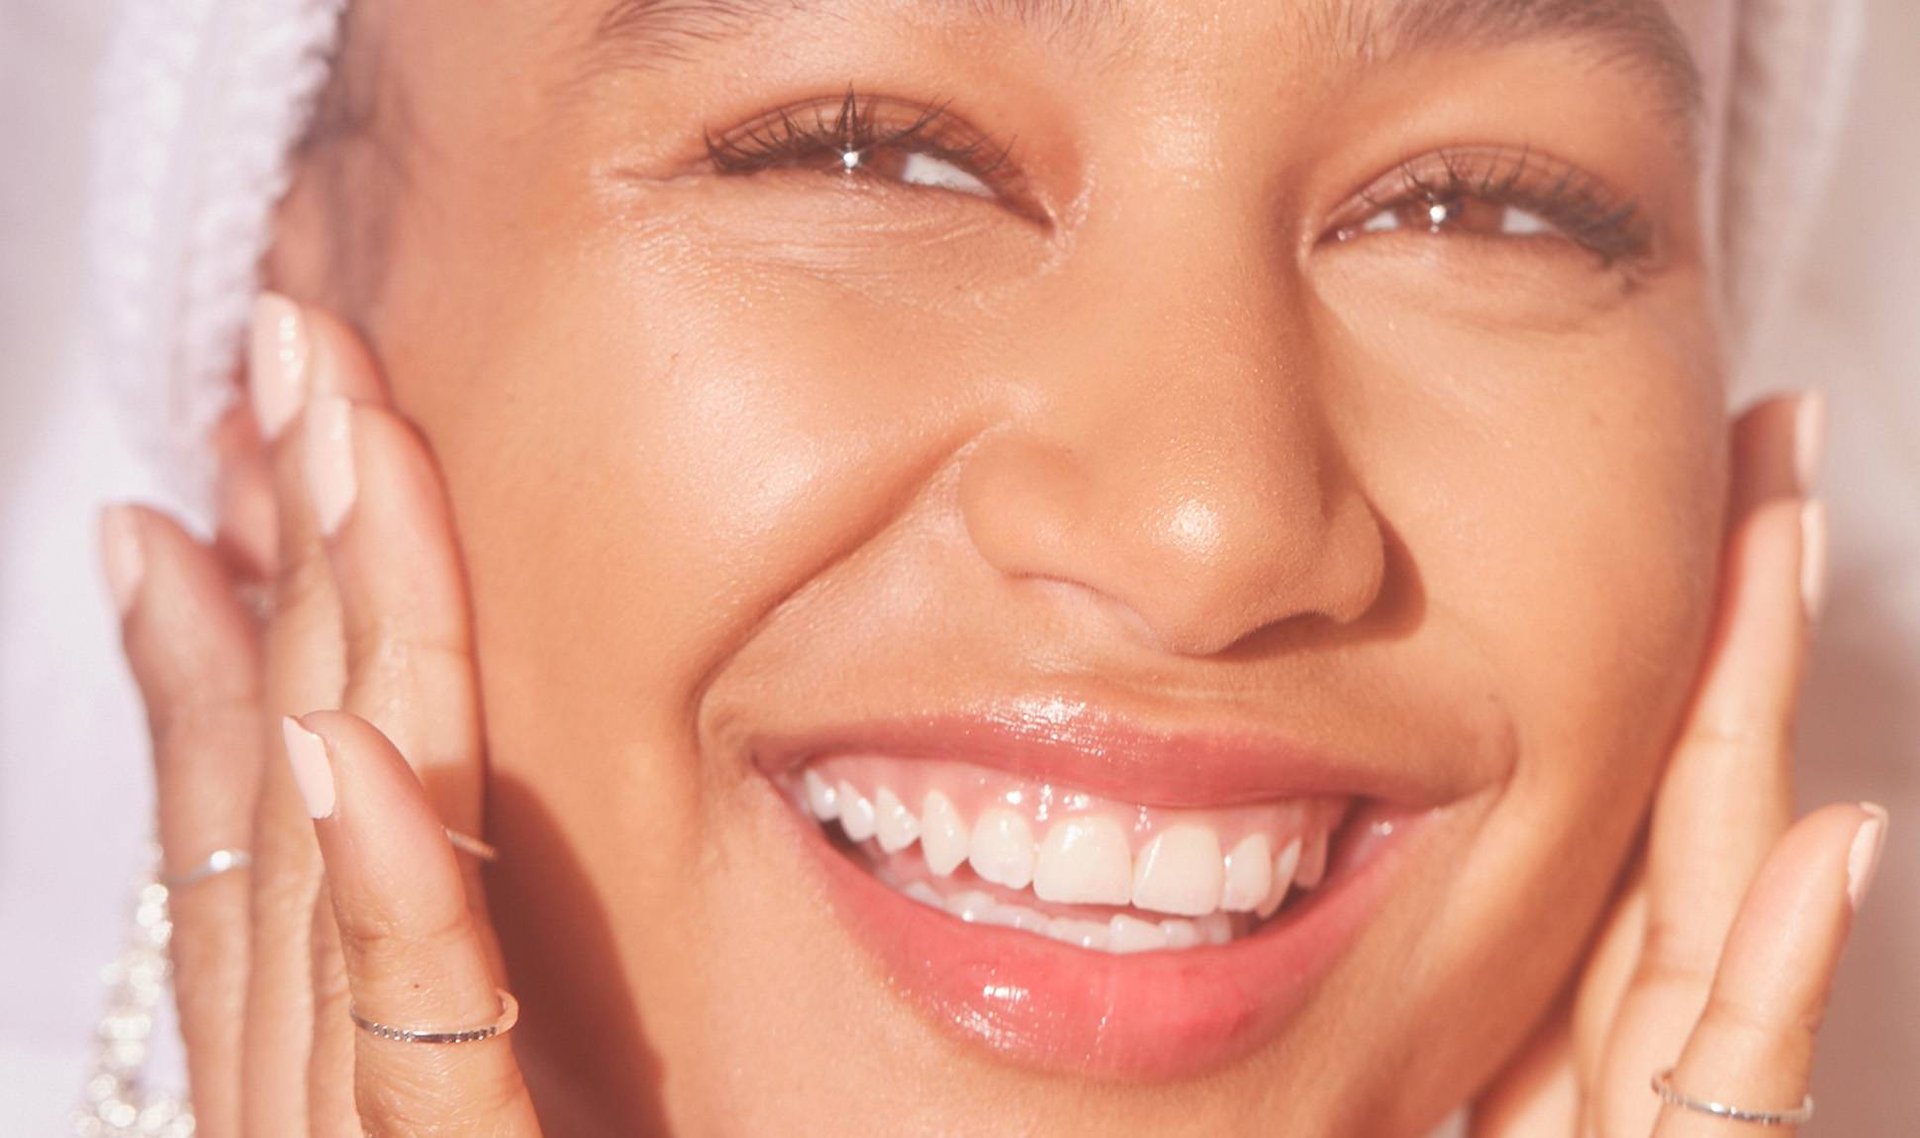 How to Prep Your Skin for Prom, According to an Esthetician